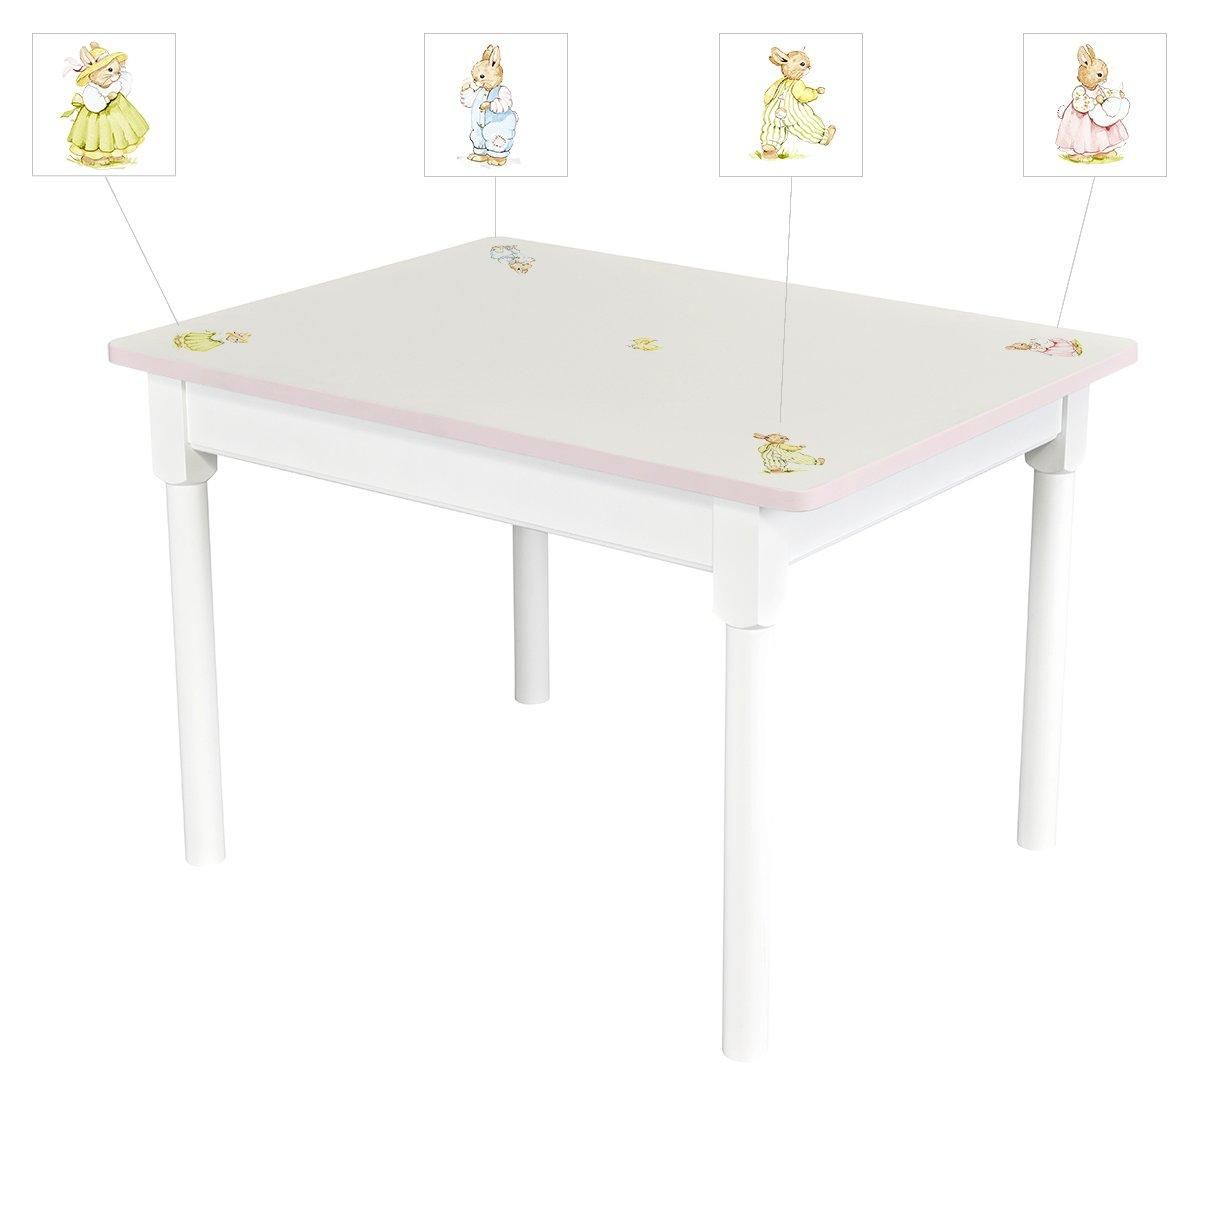 Play Table - Barbara's Bunnies with Dragons Pink Trim